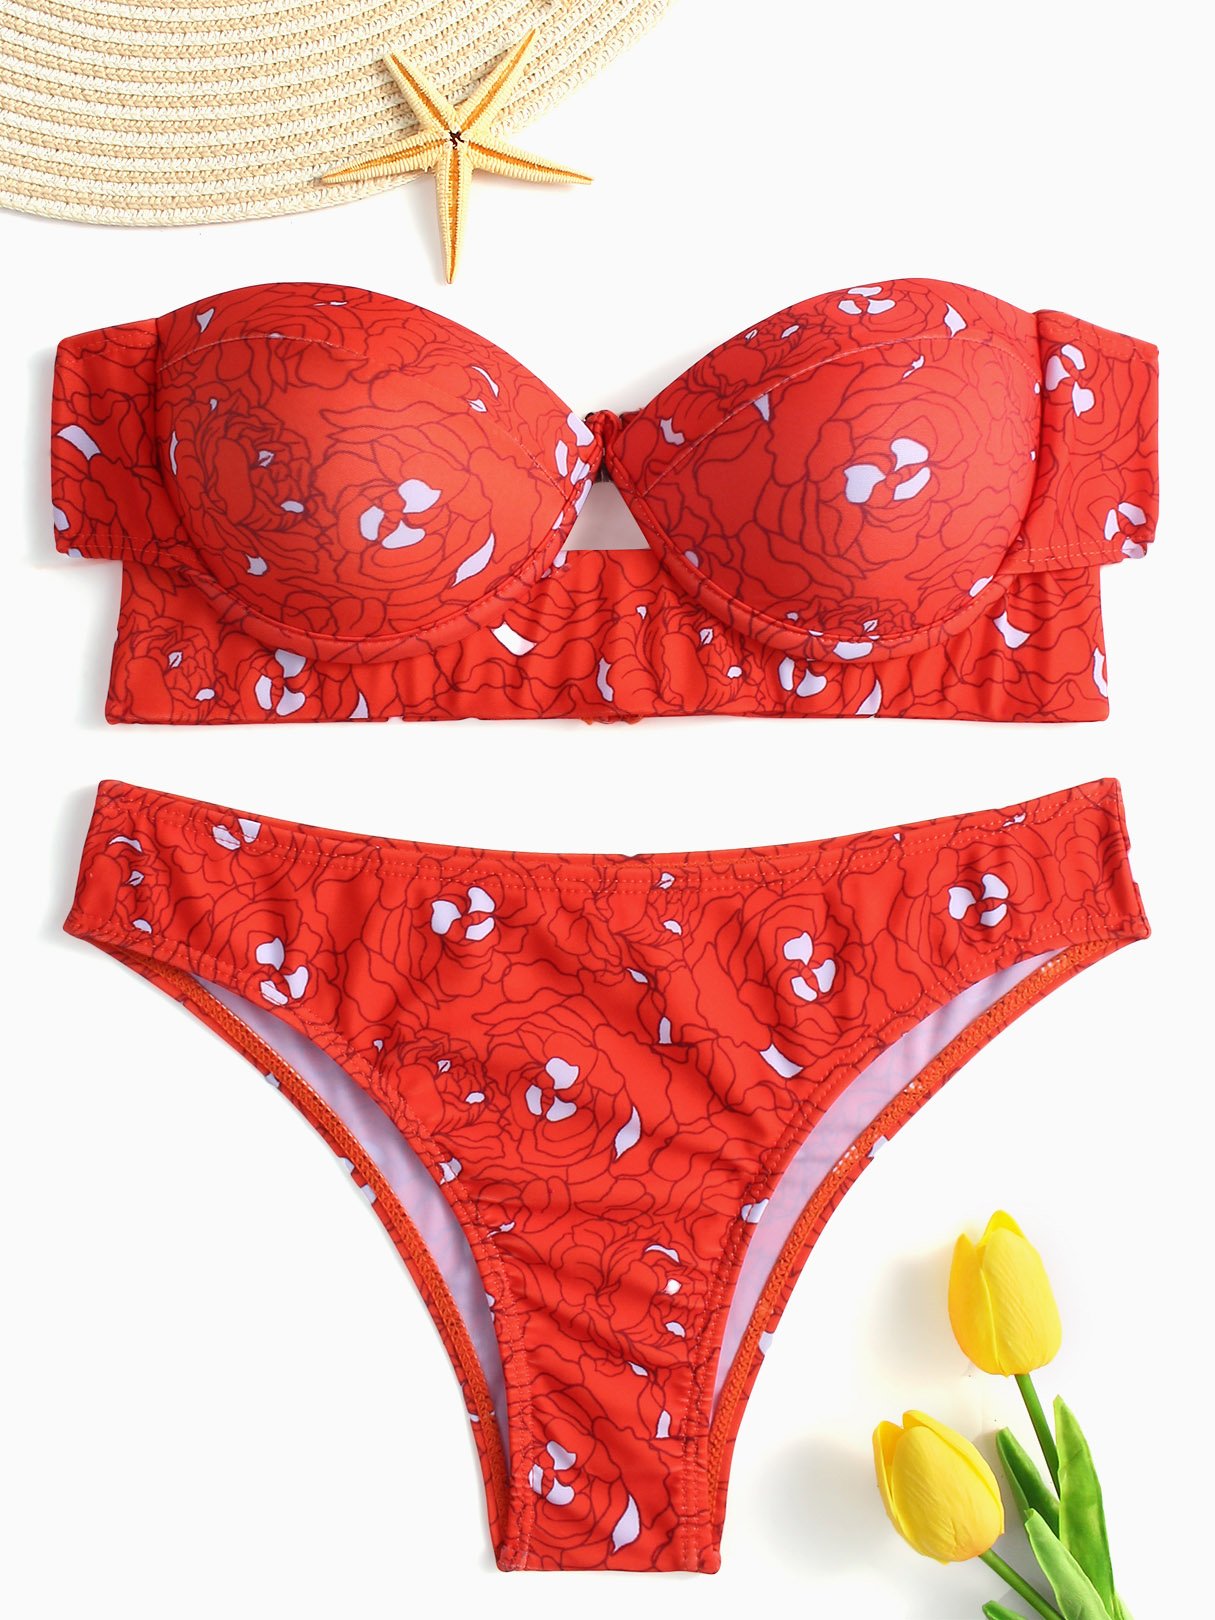 Wholesale Red Strapless Off The Shoulder Floral Print Bodycon Bikinis Set